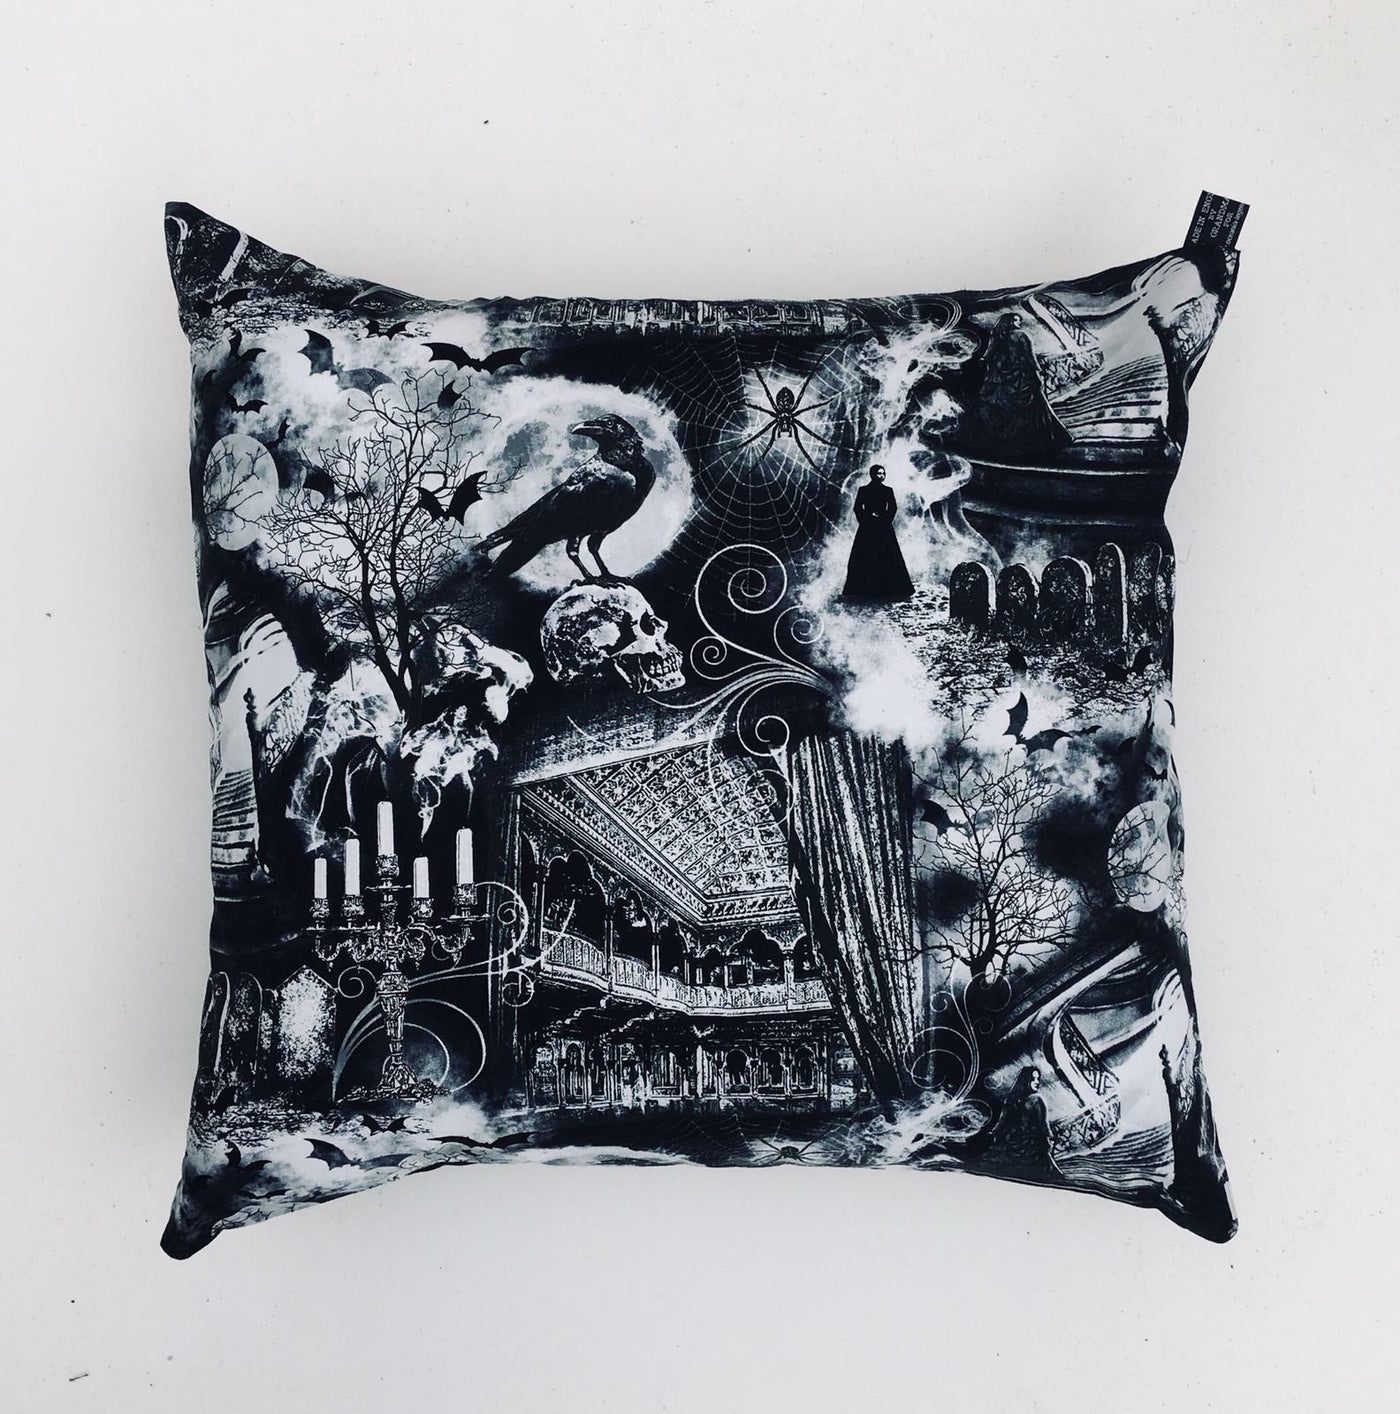 Gothic Opera Candle Spider Cushion Cover Decorative Trendy Case fits 18" x 18"